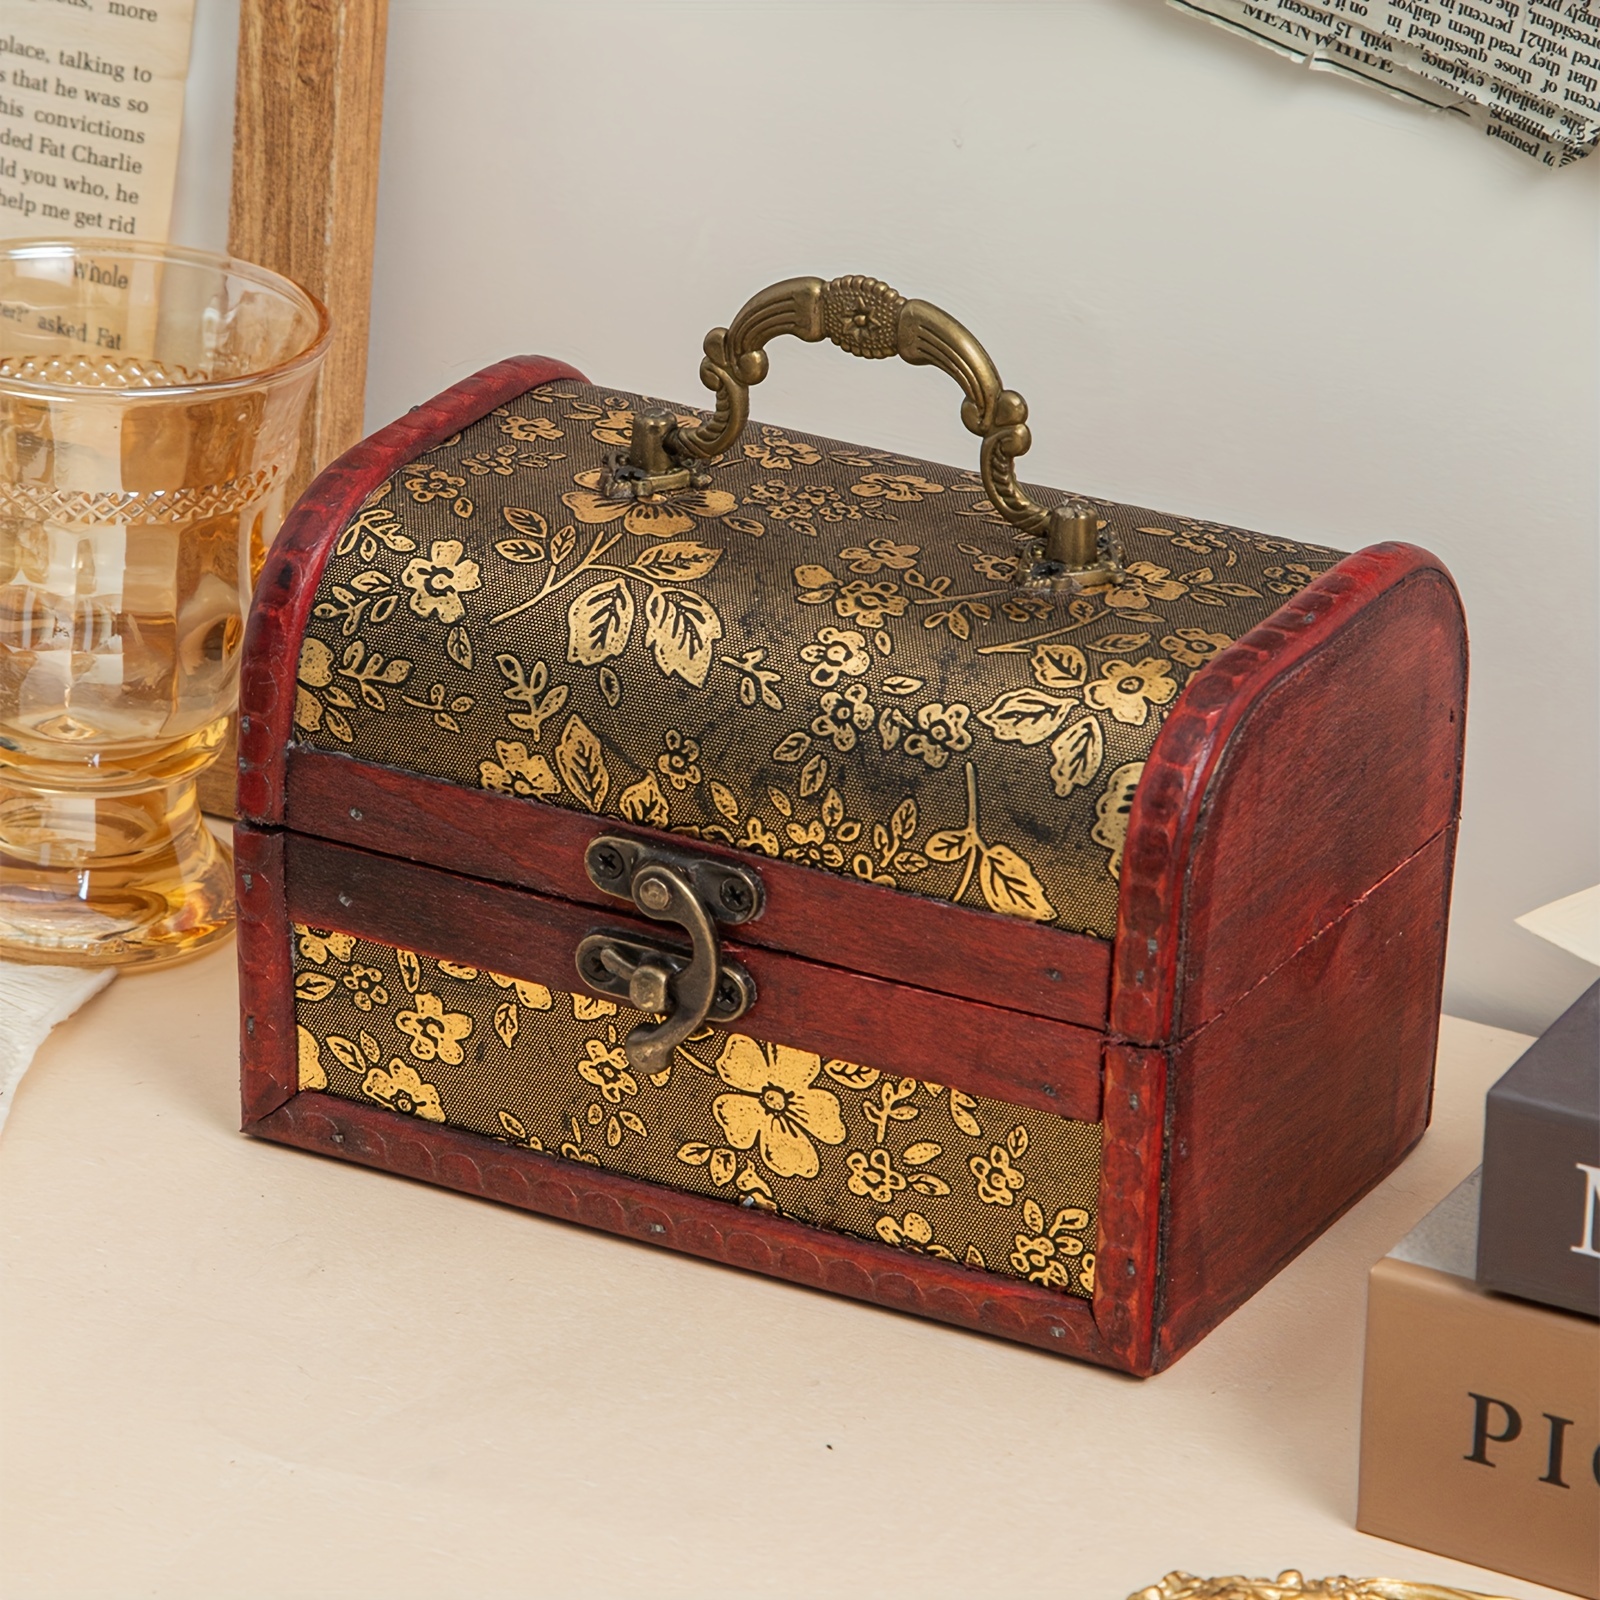 Tebru Wooden Box, Vintage Suitcase Lockable Box Vintage Wooden Storage Box Decorative Jewelry Box with Lock for Home Large 32 x 23.5 x 11.5 cm